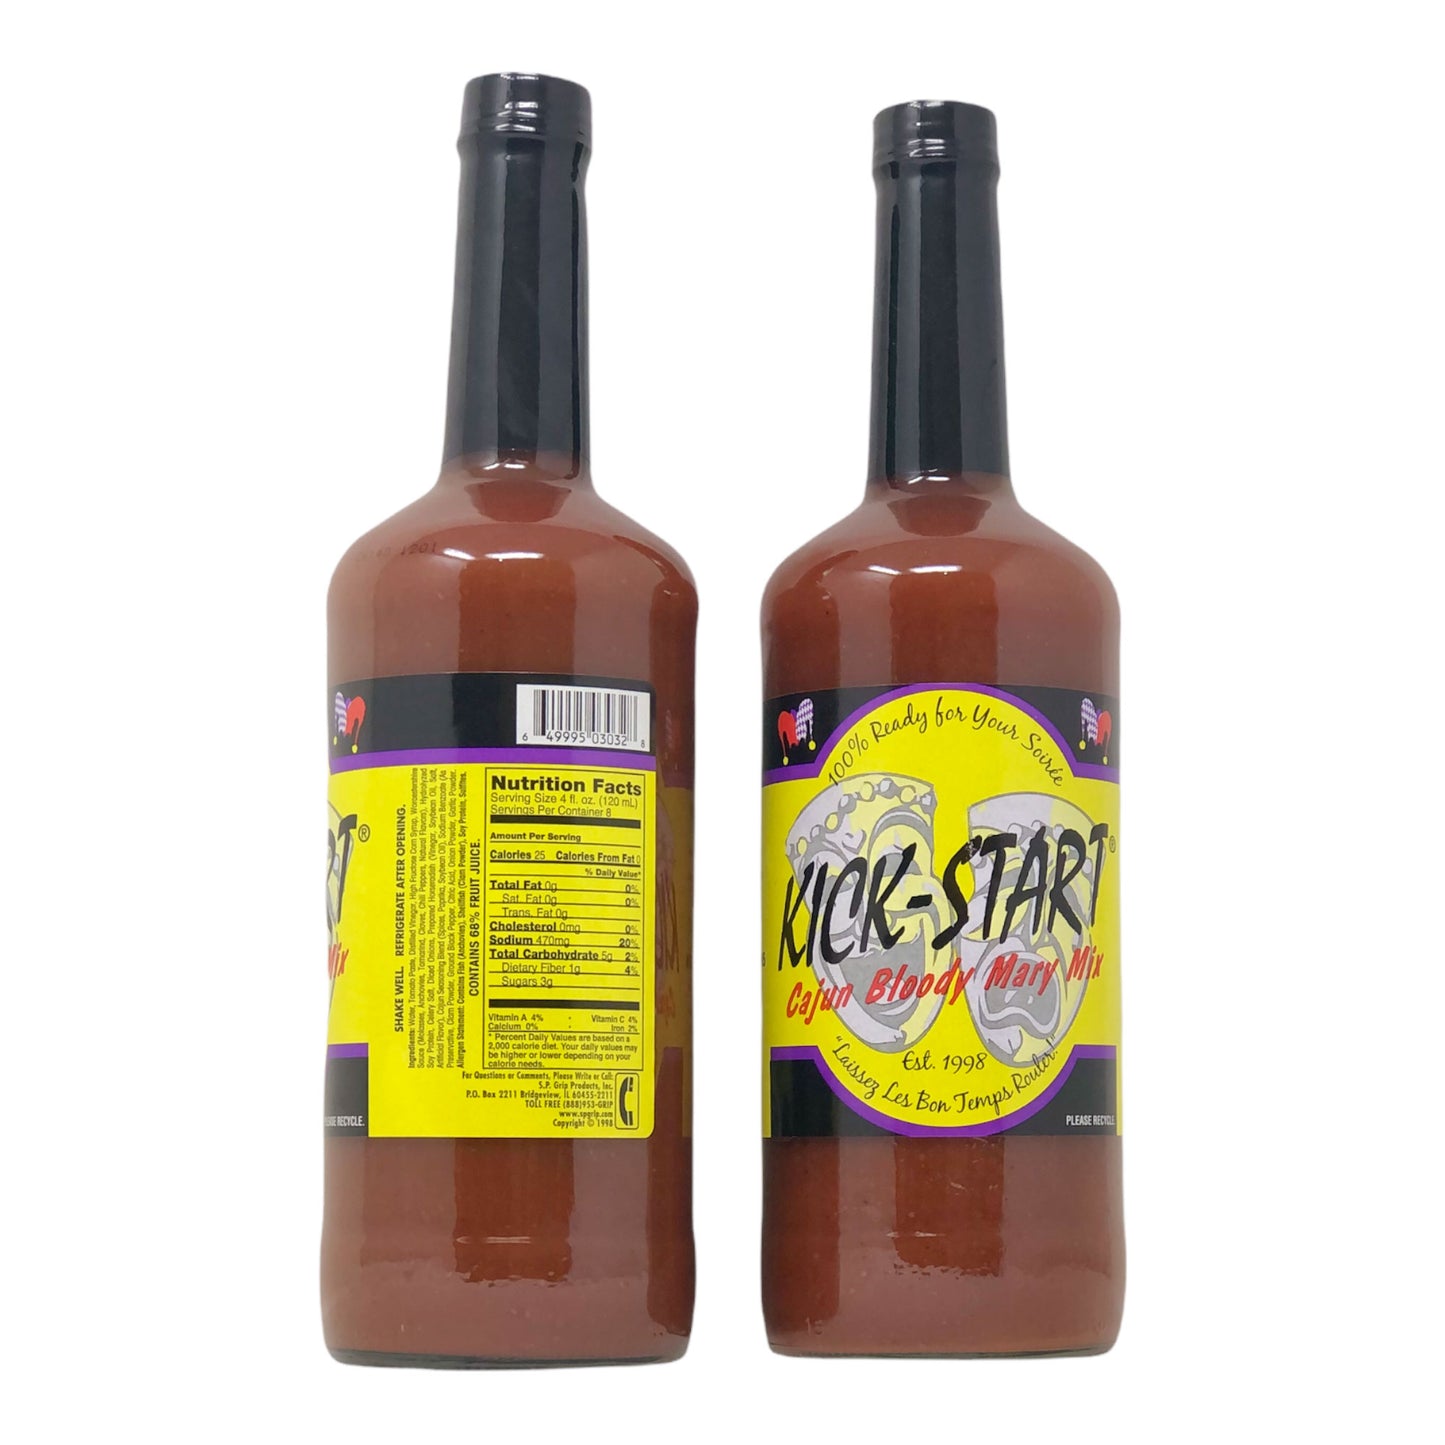 Kick Start Cajun Bloody Mary Mix (2 Pack, 32 fl oz each) bundled with complimentary 4-count Coasters